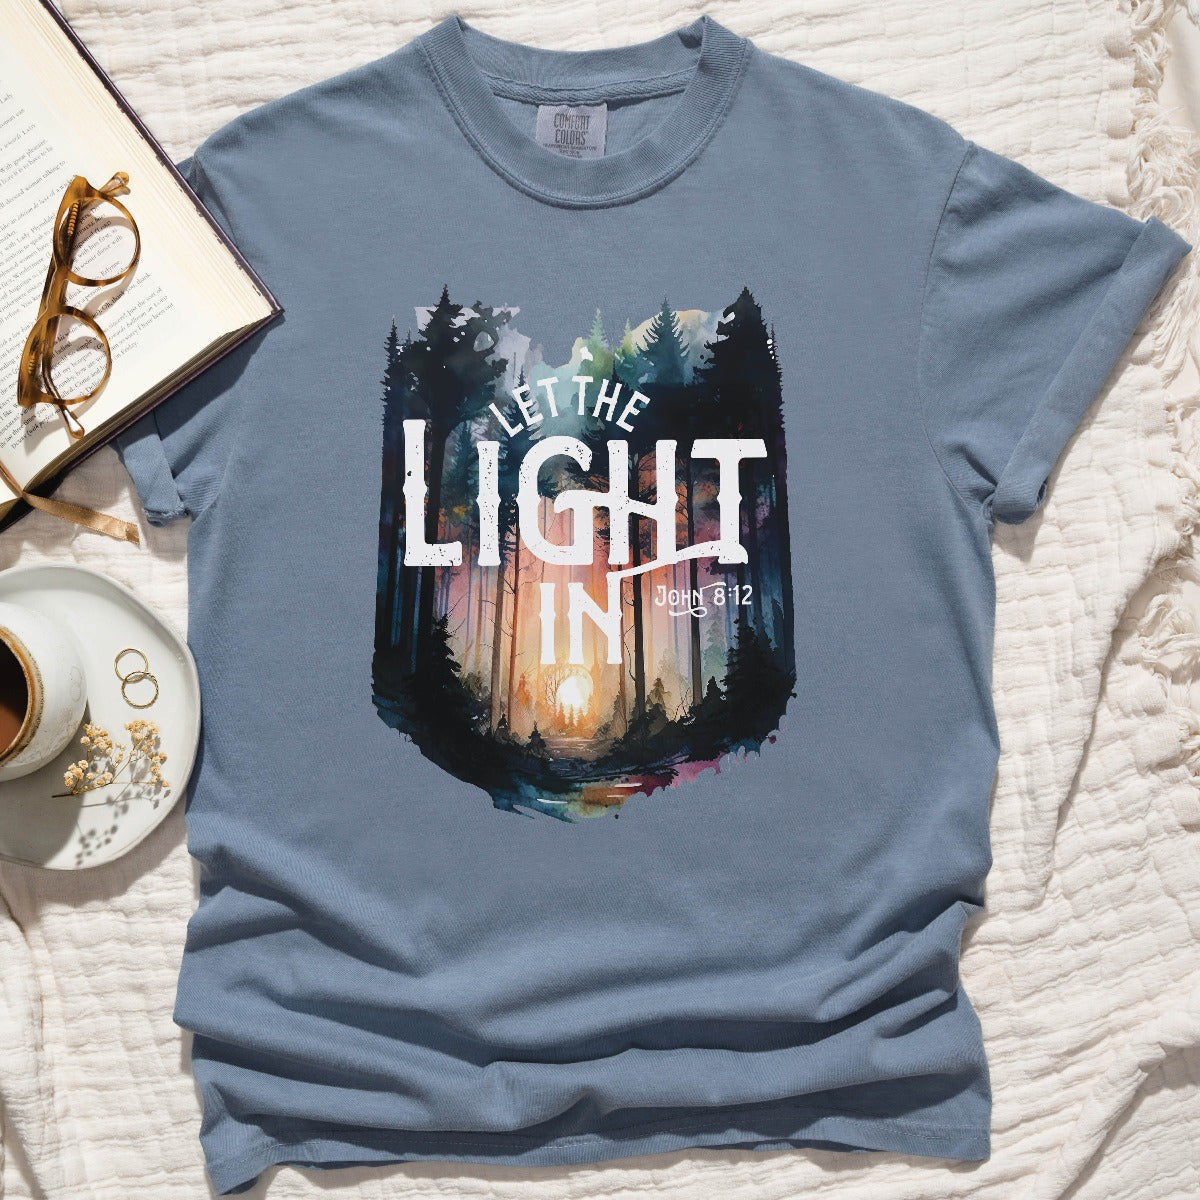 Blue Jean dusty blue color garment dyed Comfort Colors C1717 unisex faith-based Christian t-shirt with "Let the Light In" John 8:12 bible verse and watercolor moody forest trees scene, designed for men and women